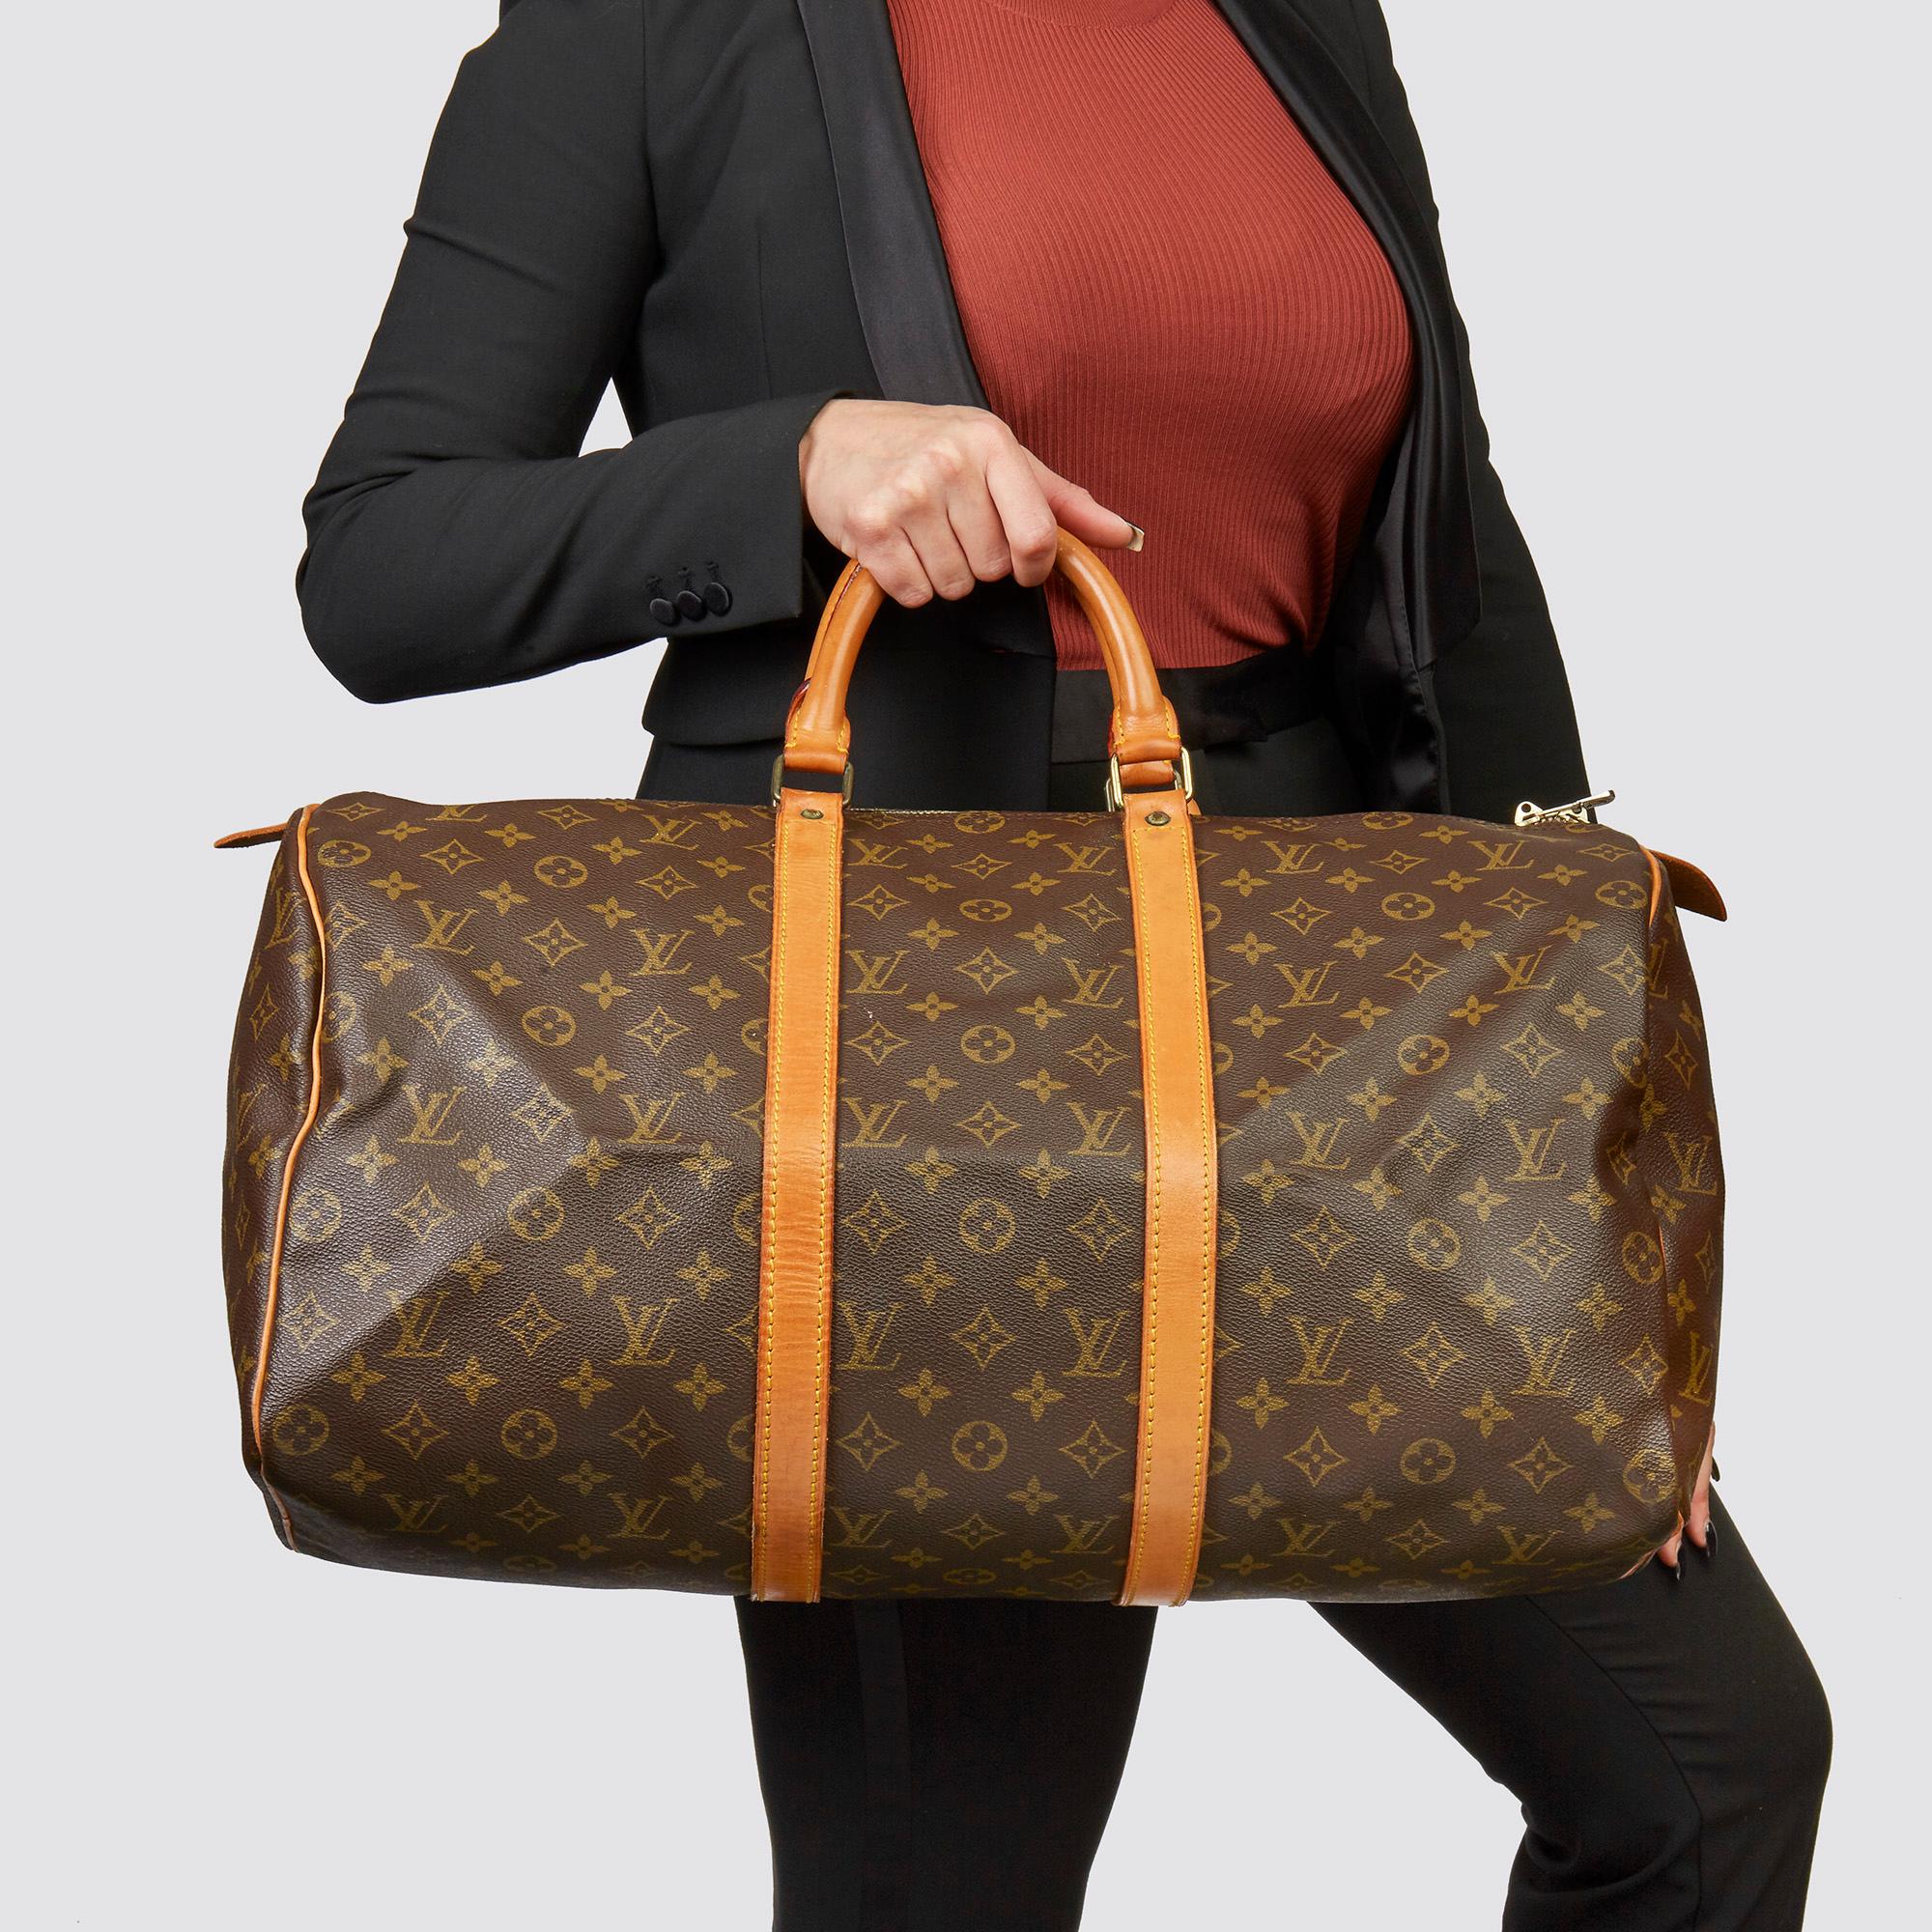 LOUIS VUITTON
Brown Monogram Coated Canvas & Vachetta Leather Vintage Keepall 50

Xupes Reference: HB3579
Serial Number: VI871
Age (Circa): 1981
Authenticity Details: Date Stamp (Made in France) 
Gender: Unisex
Type: Travel

Colour: Brown
Hardware: